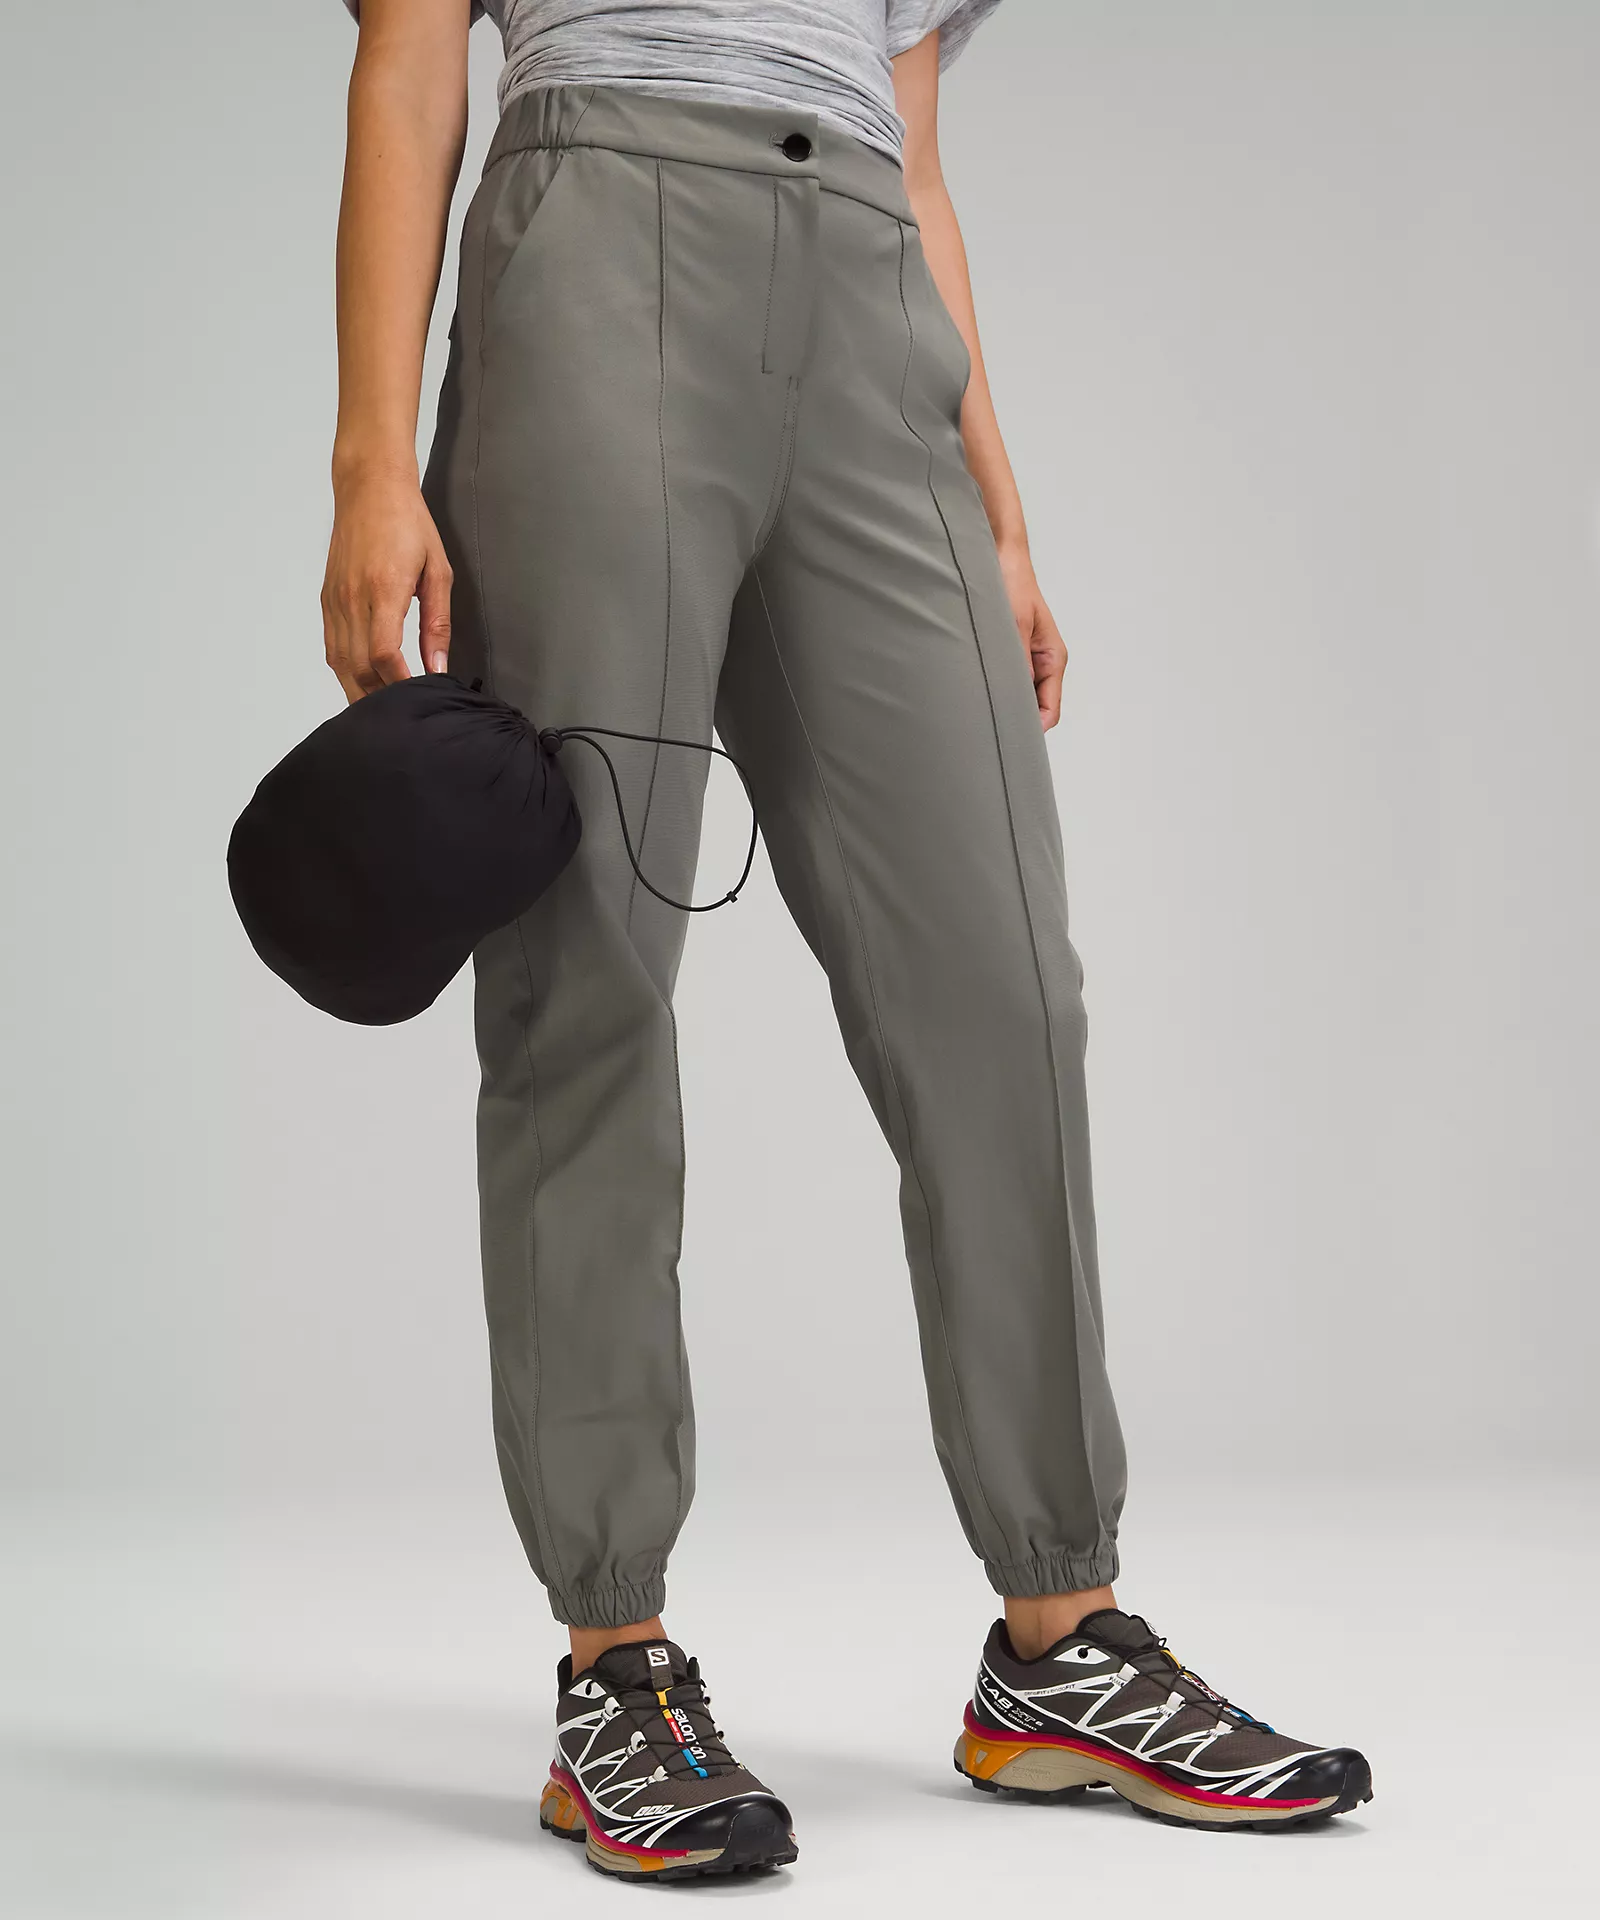 Athleta - You can find us in Featherweight stretch until further notice.  Shop our Skyline Pant